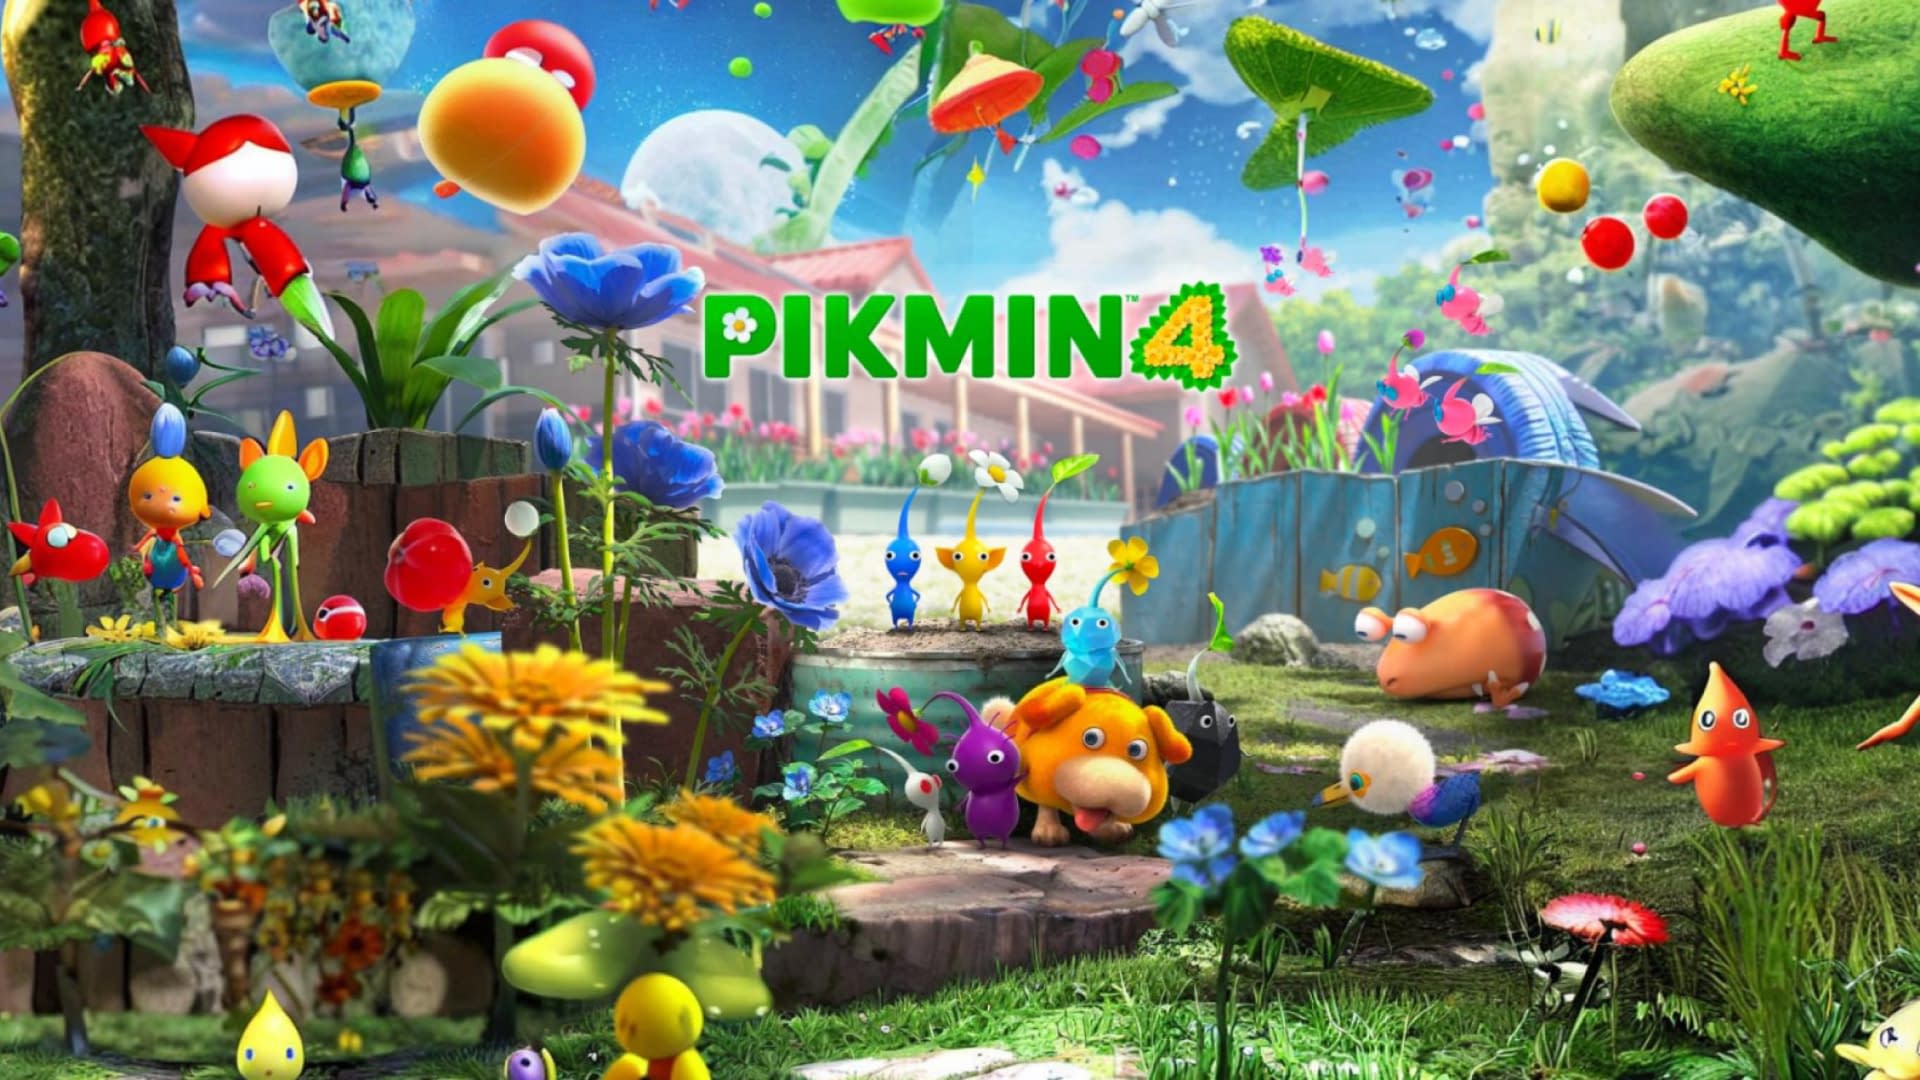 Why does Pikmin Series Do Not Sell Much Like Others? The Game Designer Announced